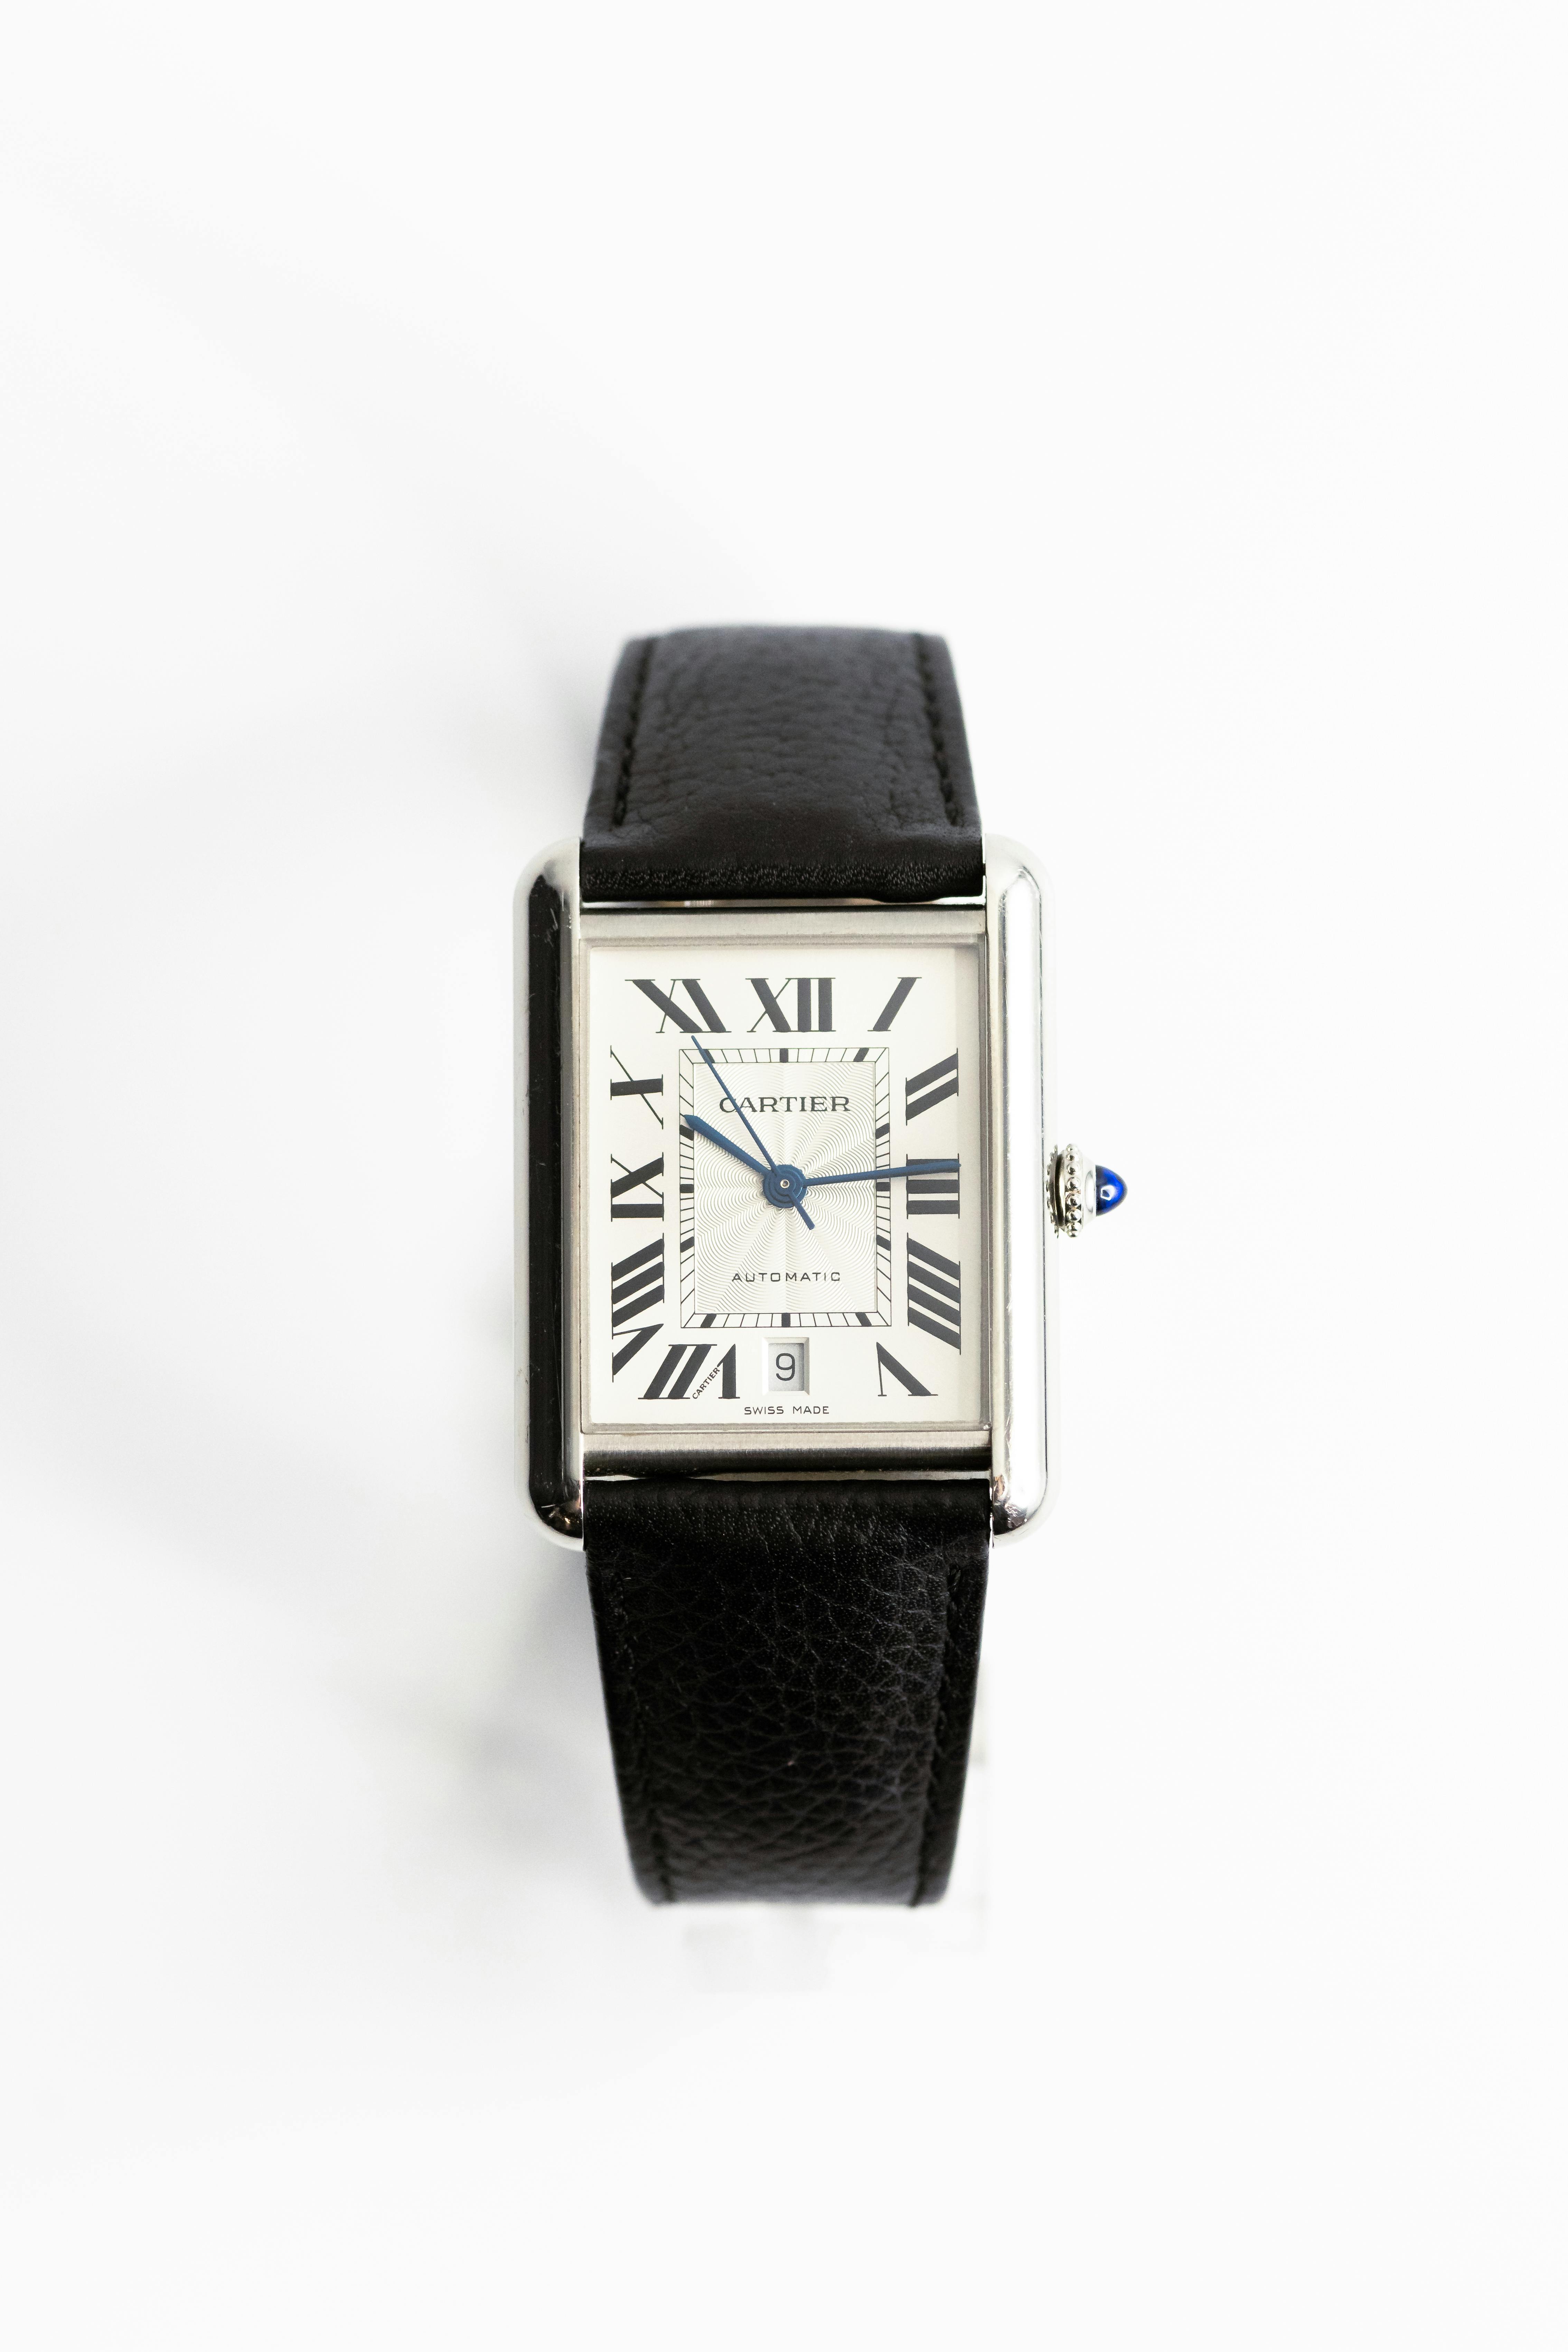 2021 CARTIER TANK MUST EXTRA-LARGE for sale by auction in London ...